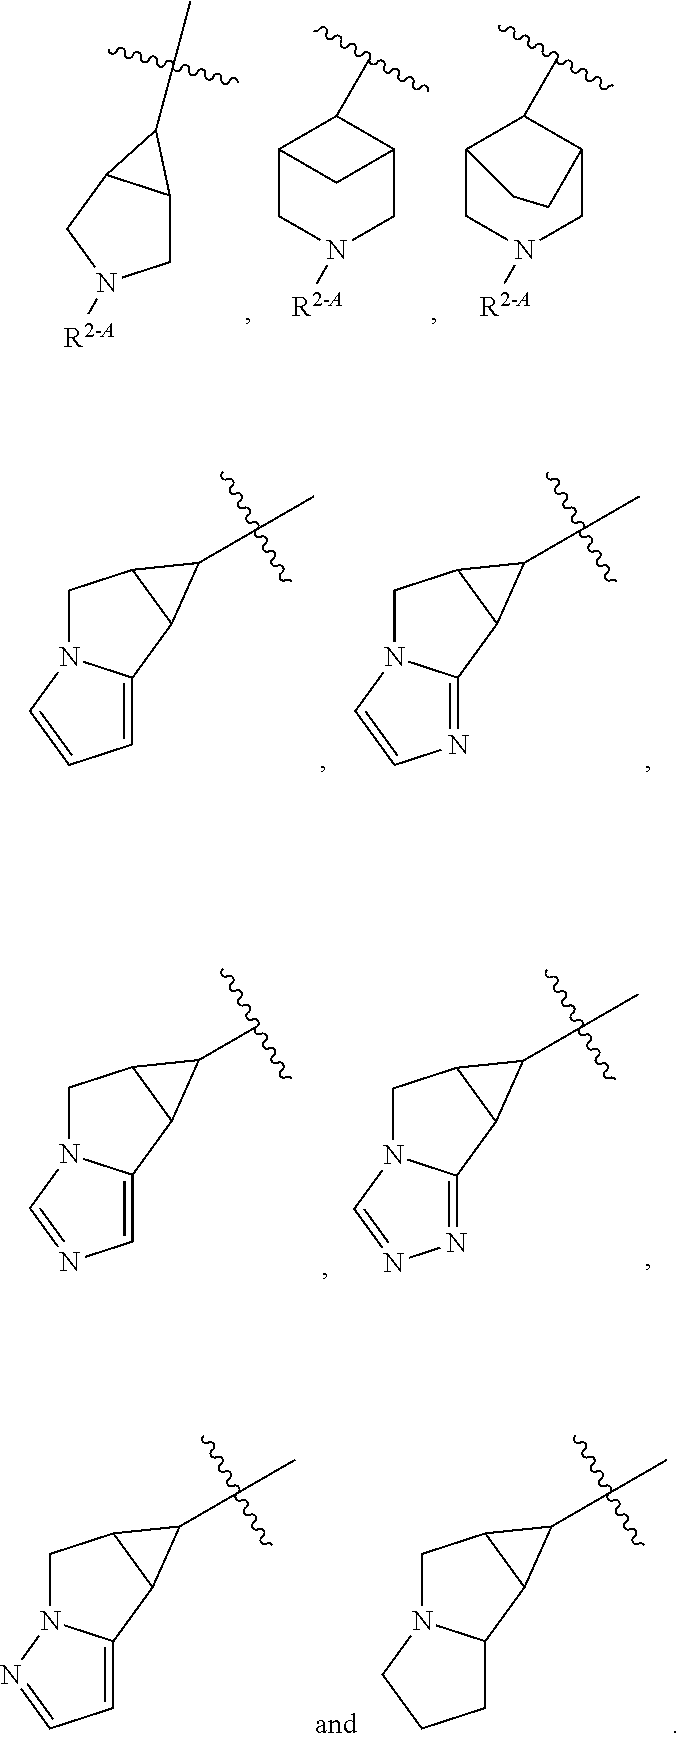 3-substituted pyrazoles and use as DLK inhibitors